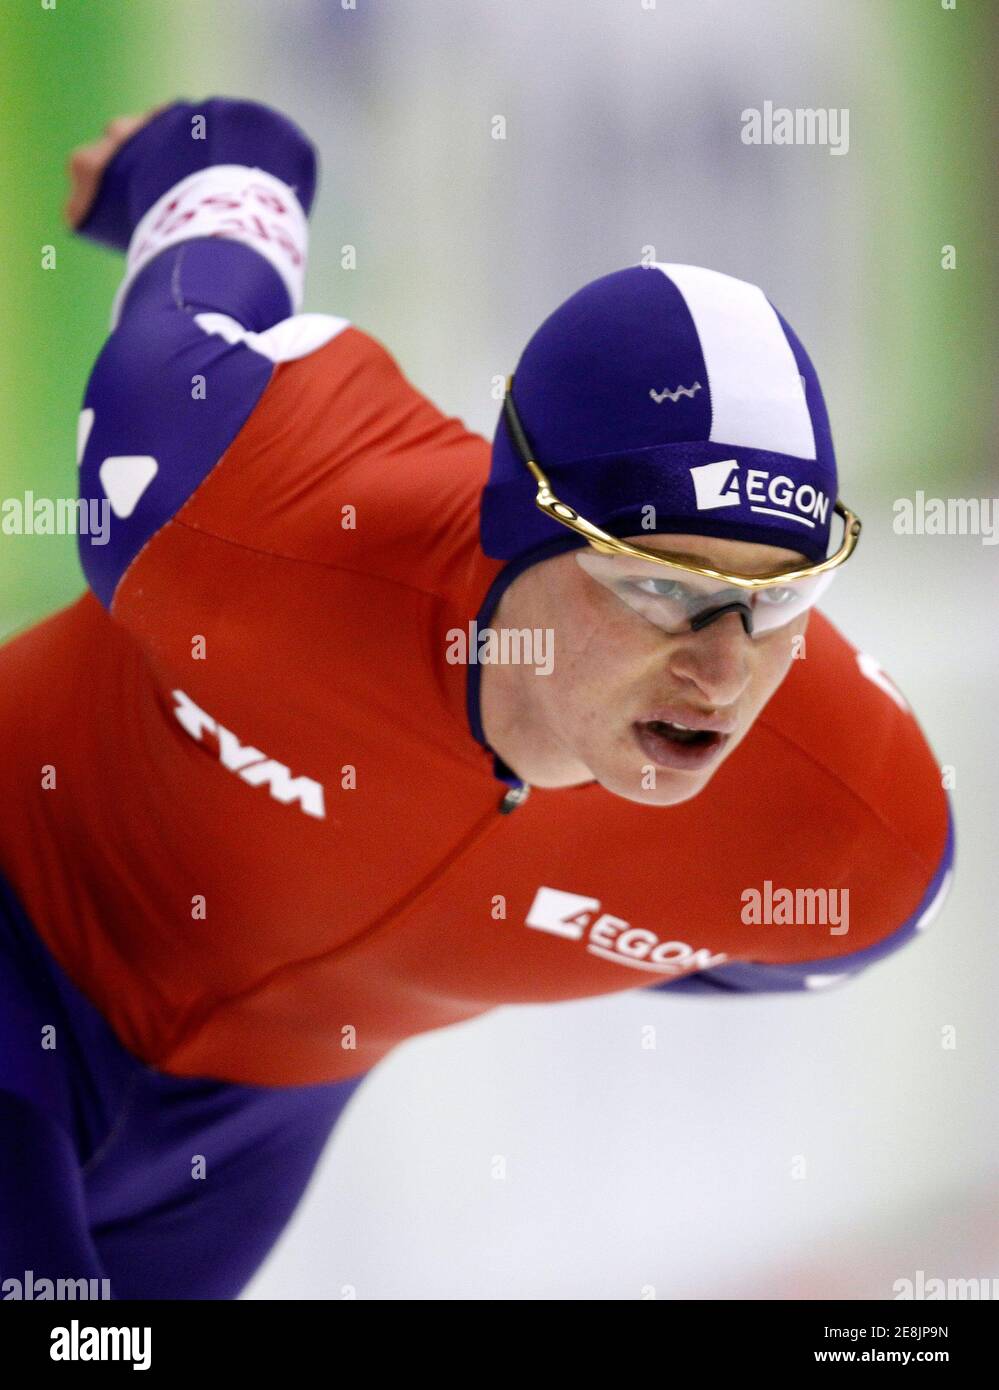 The Netherlands' Sven Kramer competes in the men's 10000 meters World Speed Skating Championships all round race at the Thialf Stadium in Heerenveen March 21, 2010. Kramer took the World Championships title for the fourth time.  REUTERS/Jerry Lampen (NETHERLANDS - Tags: SPORT SPEED SKATING) Stock Photo